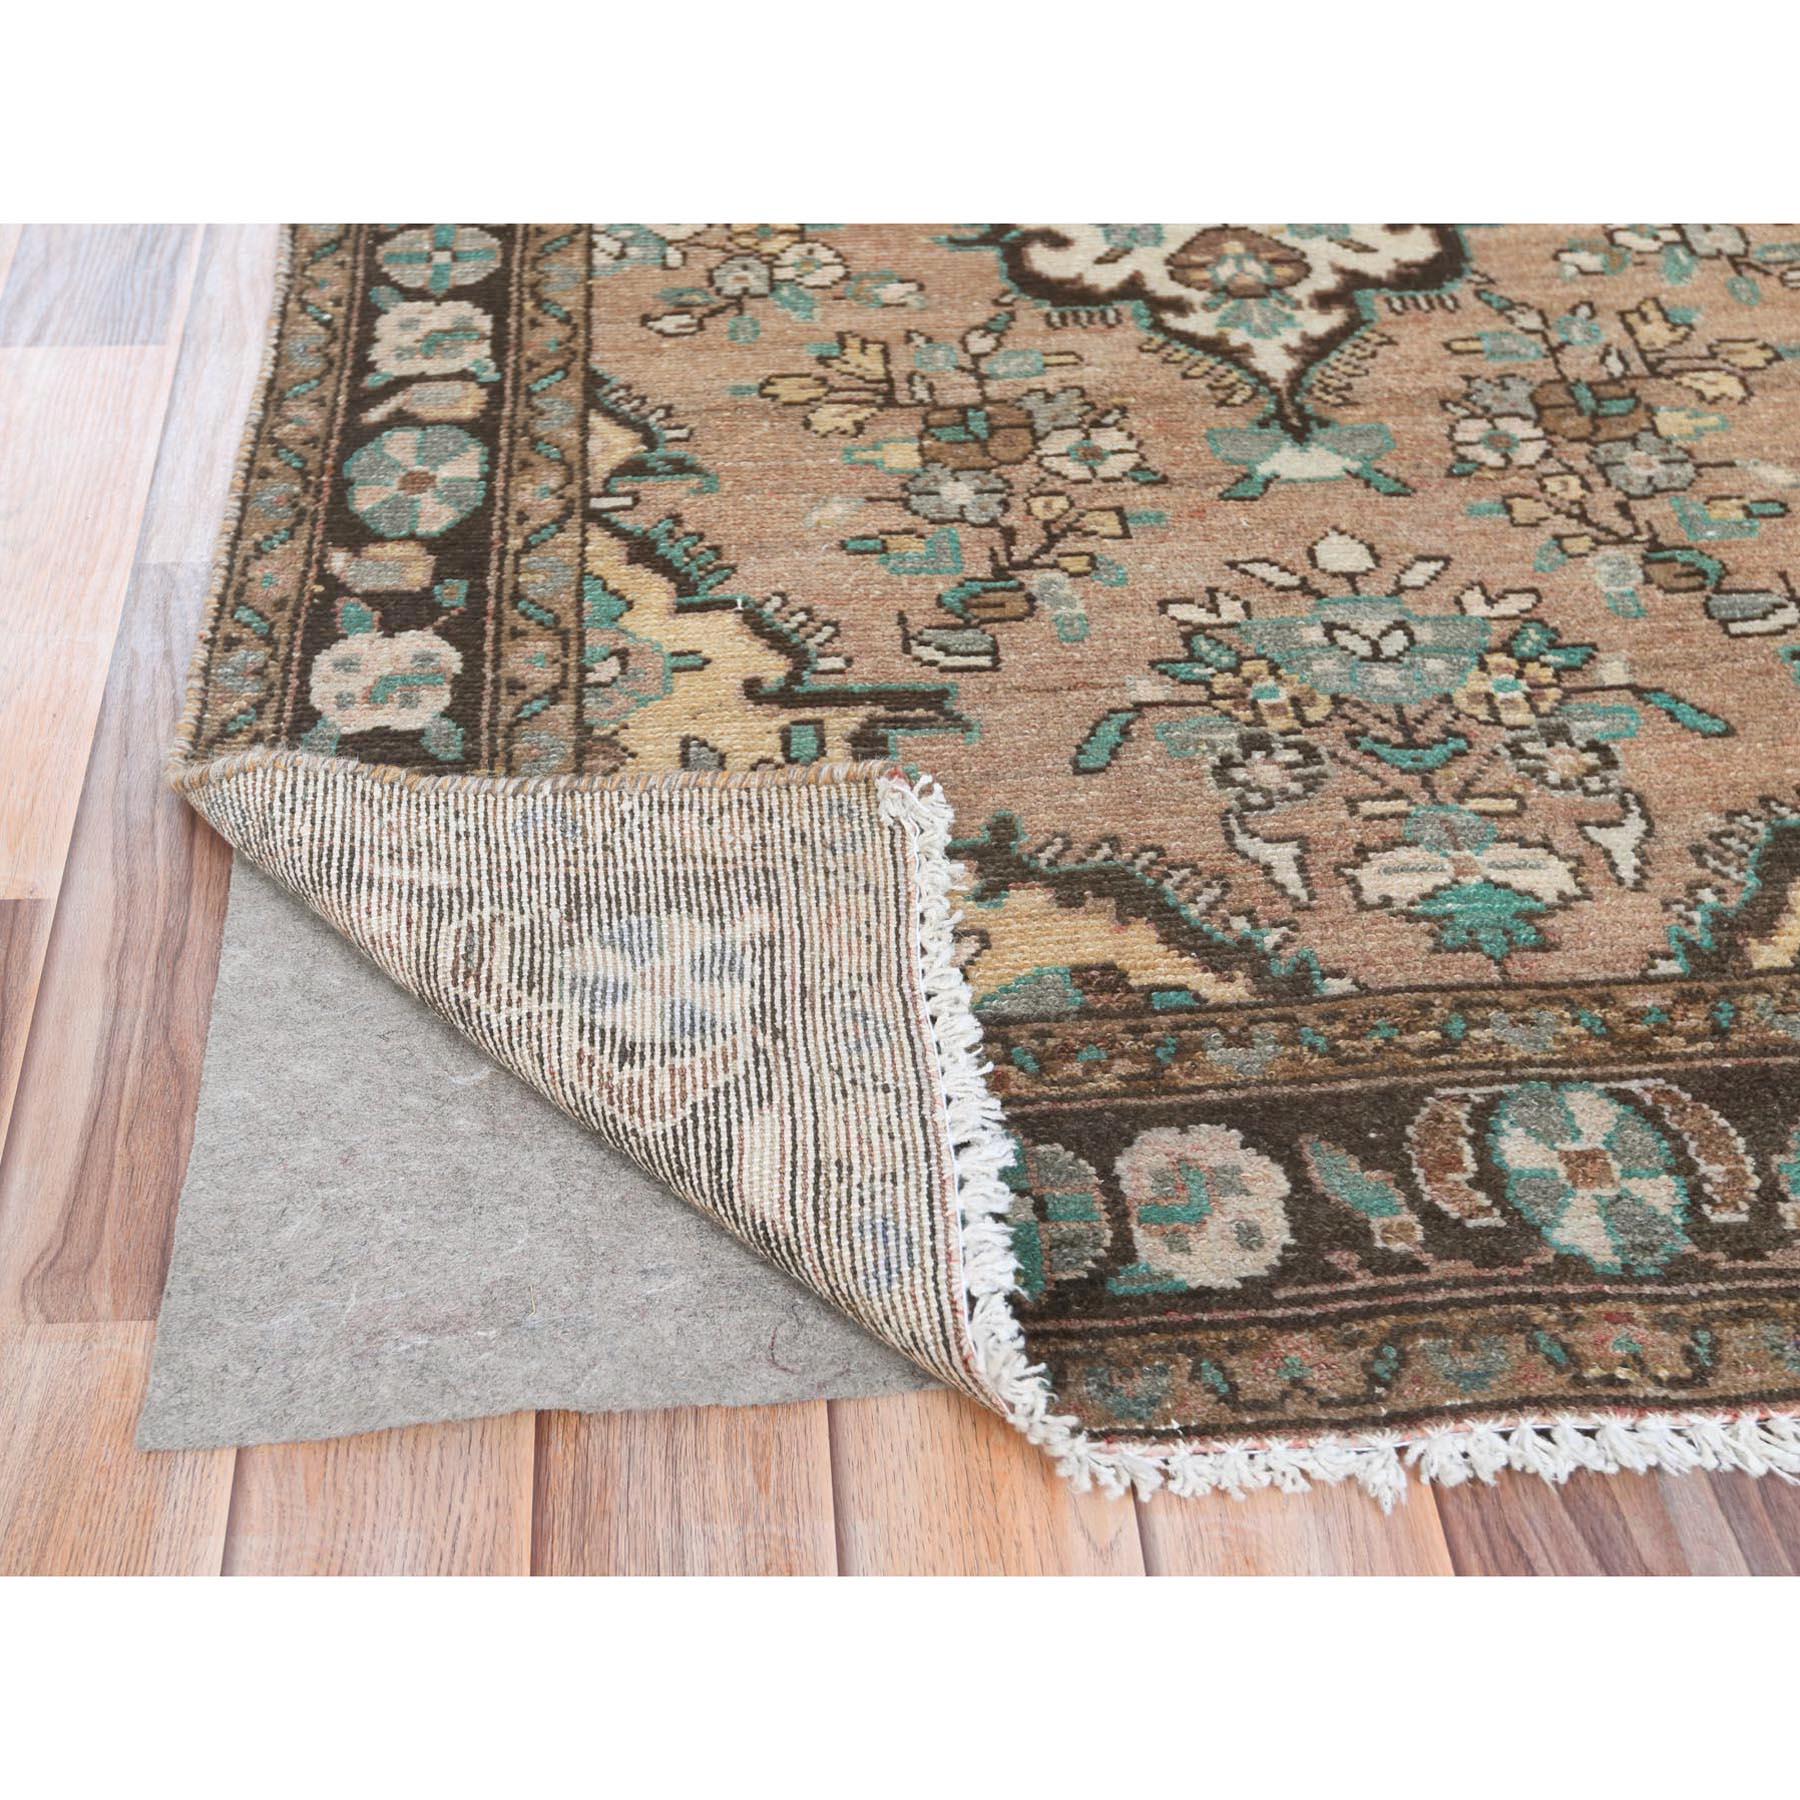 Medieval Walnut Brown, Vintage Persian Bibikabad, Distressed, Worn Wool Hand Knotted Rug For Sale